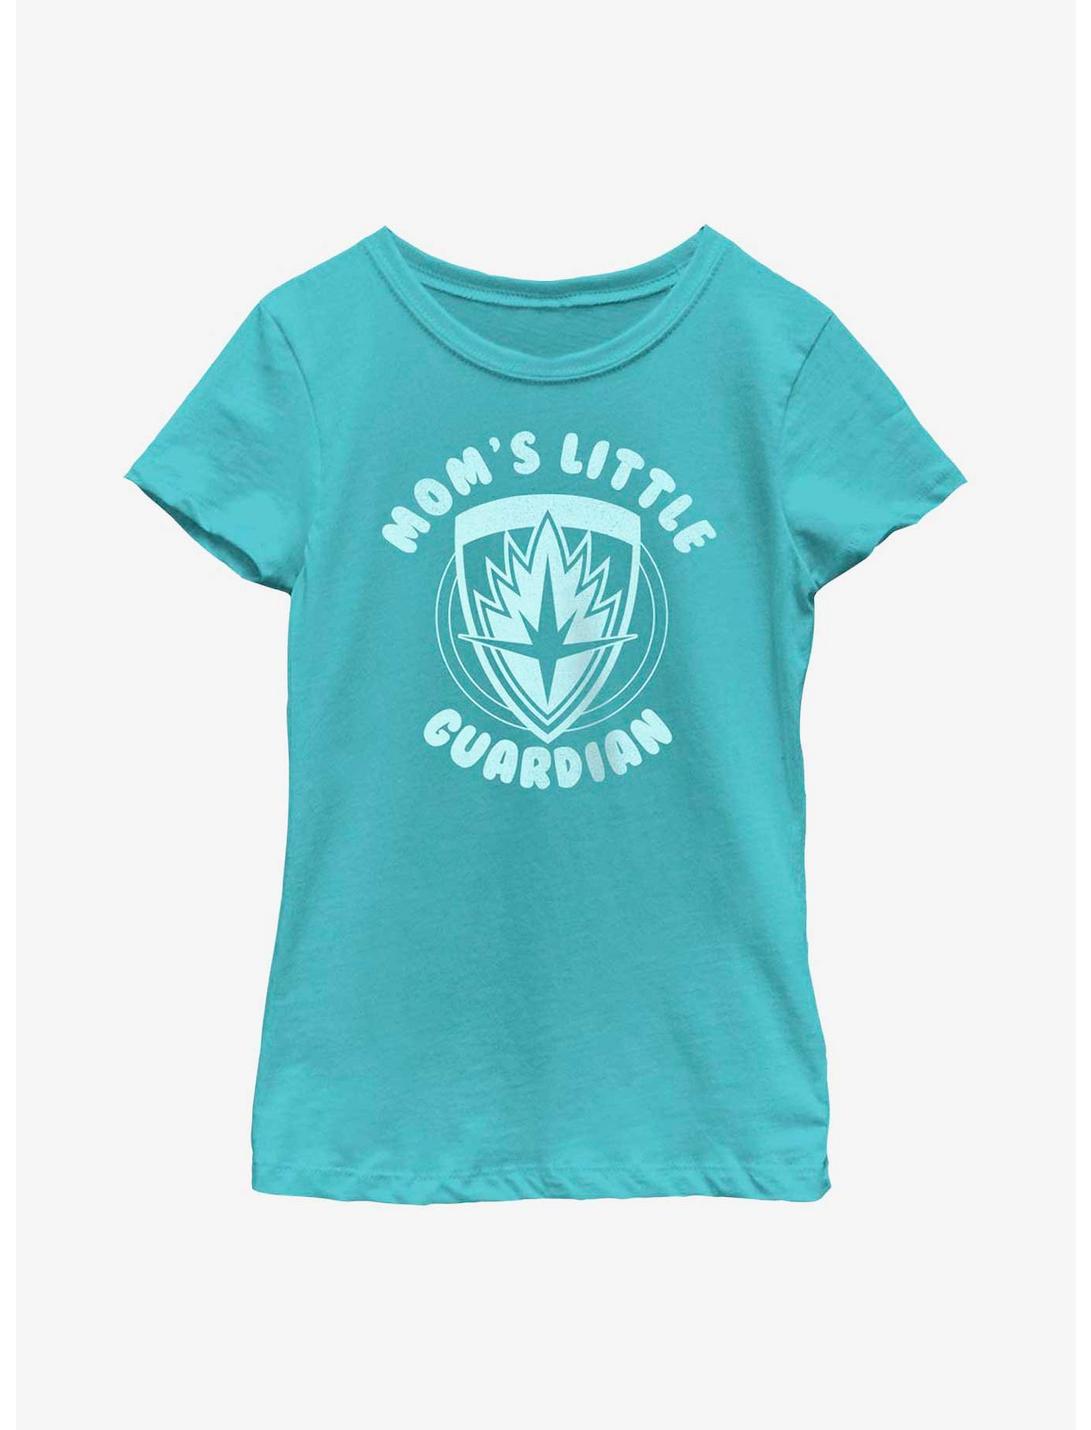 Marvel Guardians of the Galaxy Mom's Little Guardian Youth Girls T-Shirt, TAHI BLUE, hi-res